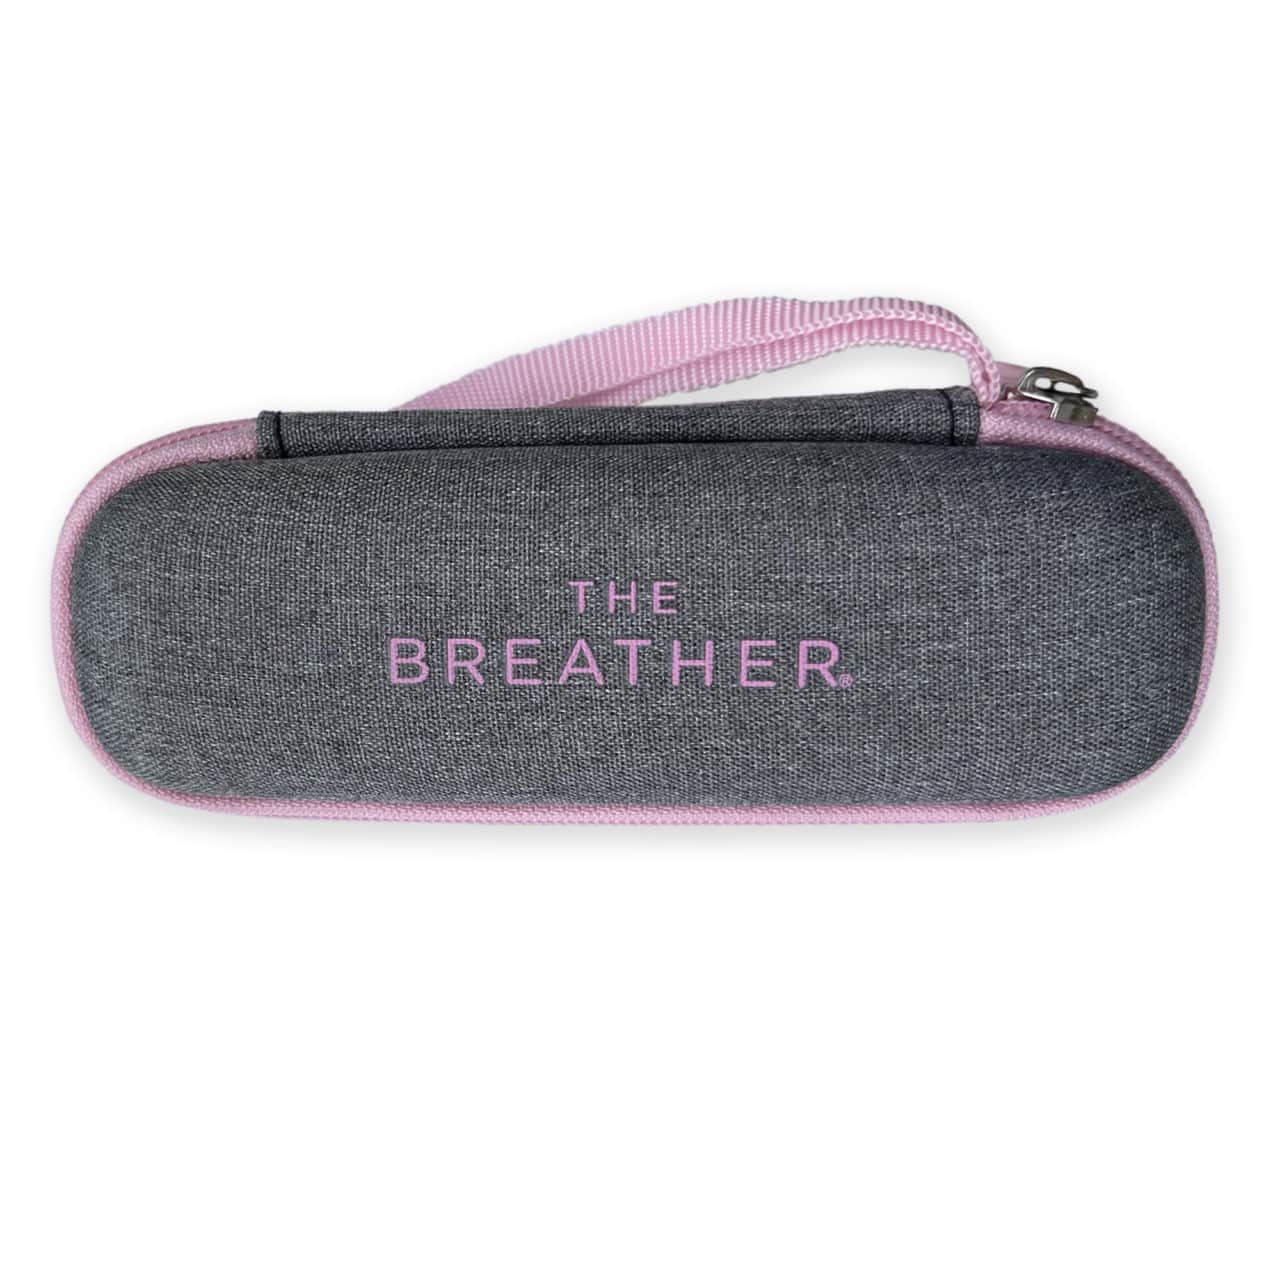 BP 005 Breather Pink Case Close